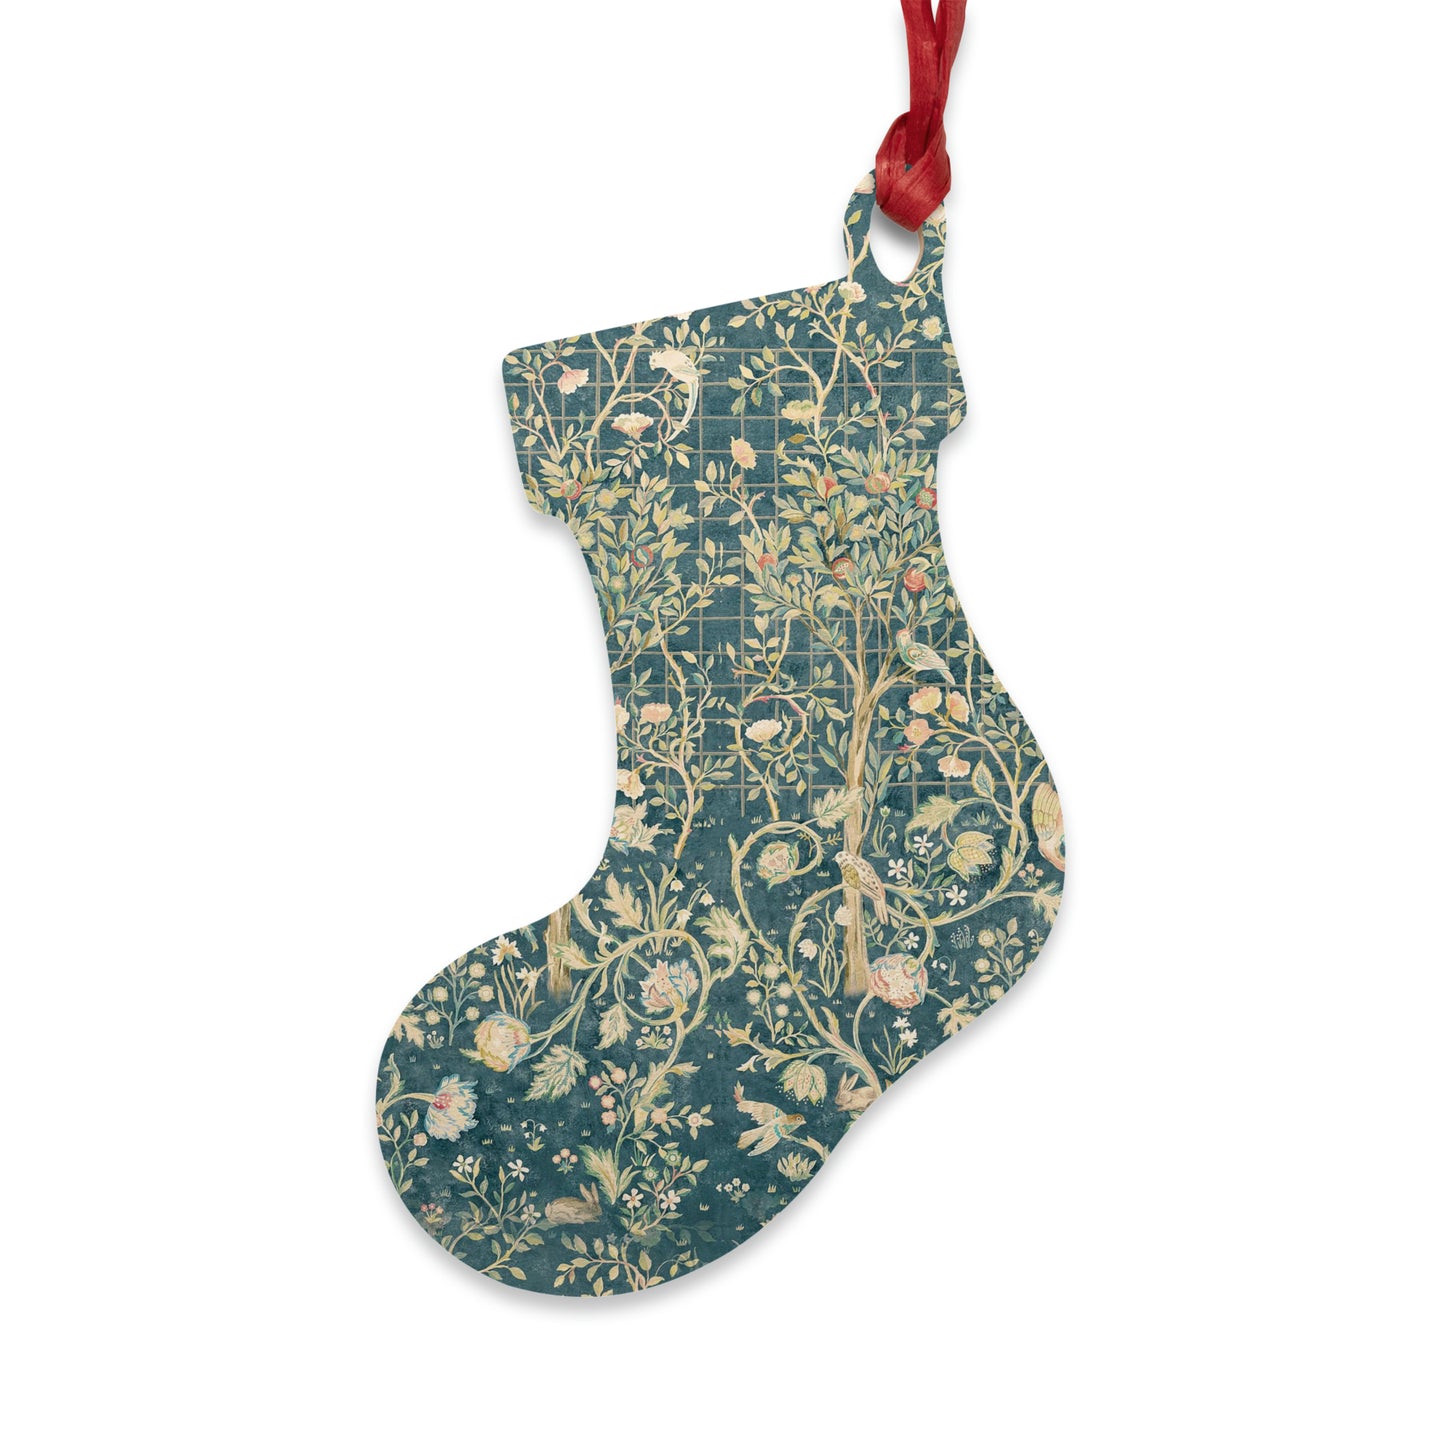 William Morris & Co Wooden Christmas Ornaments - Melsetter Collection